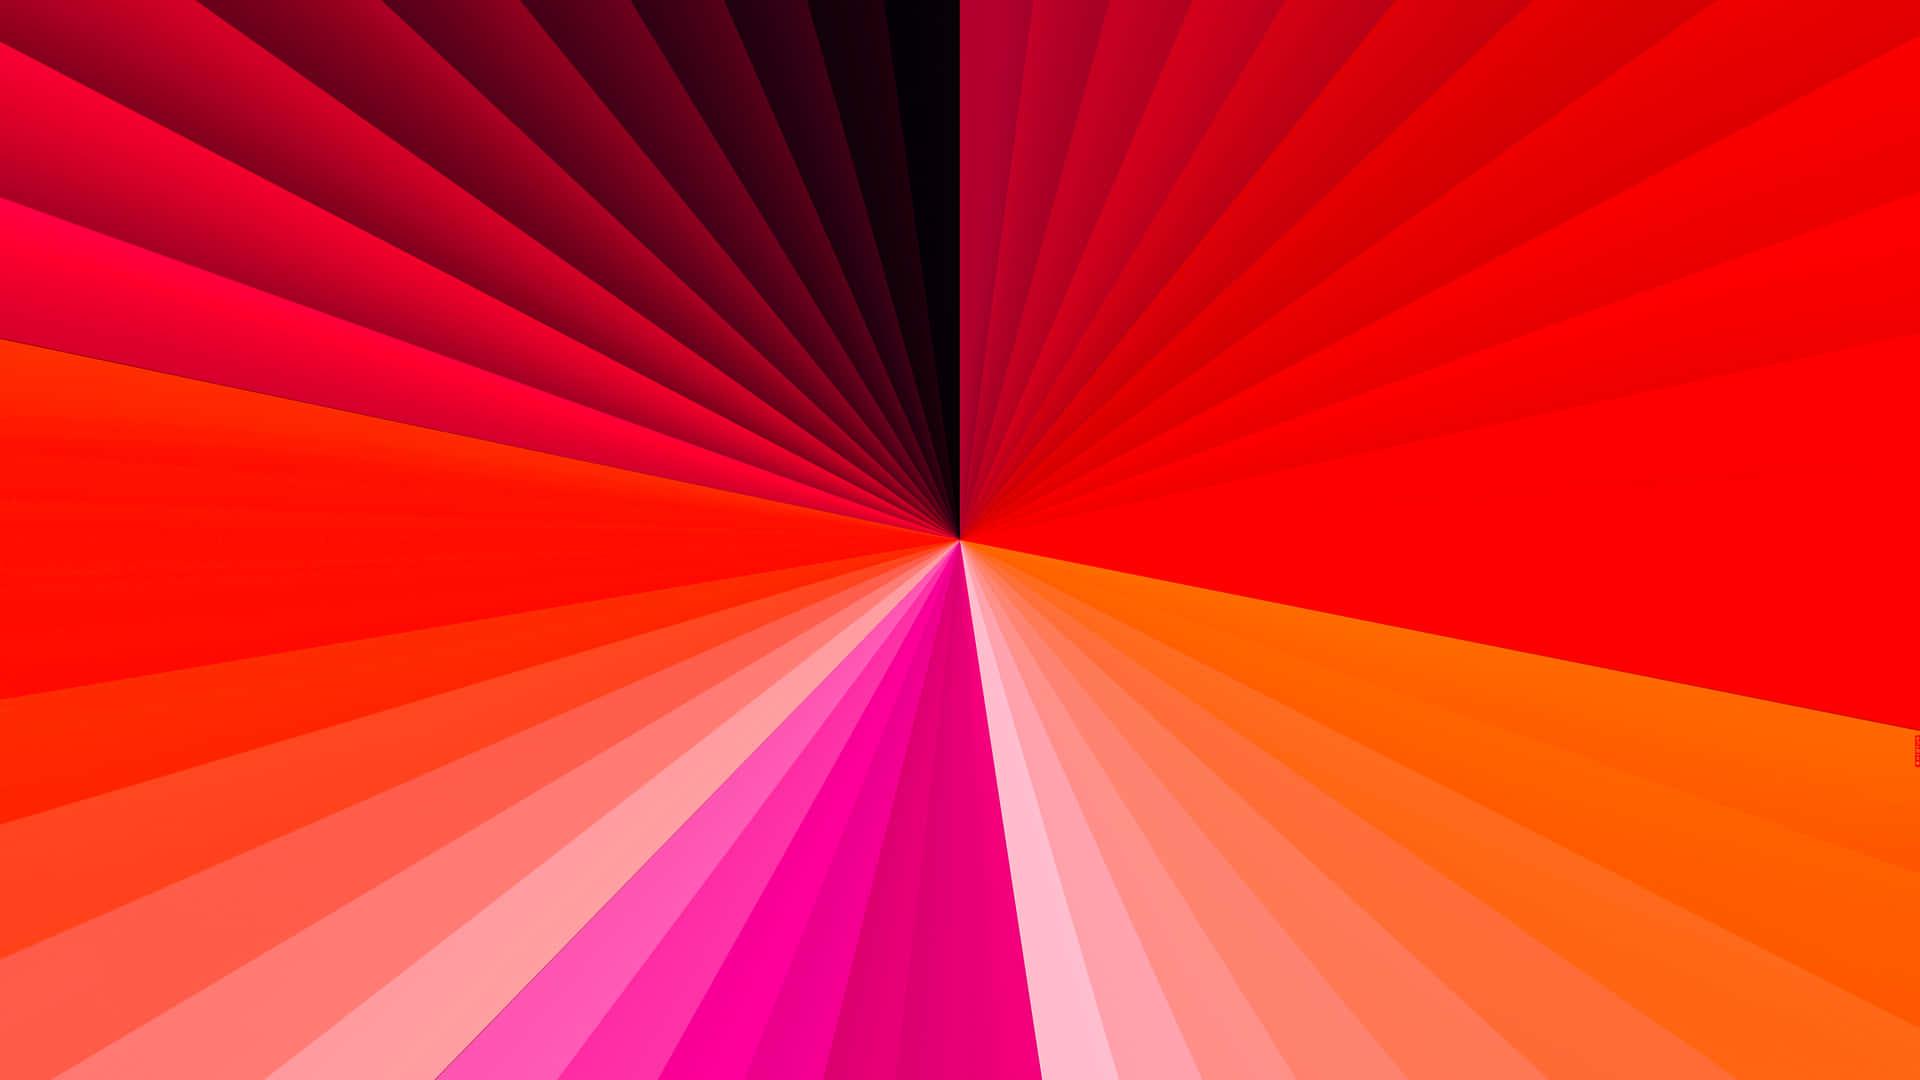 Enhance Your Wallpaper with an Orange Gradient Background